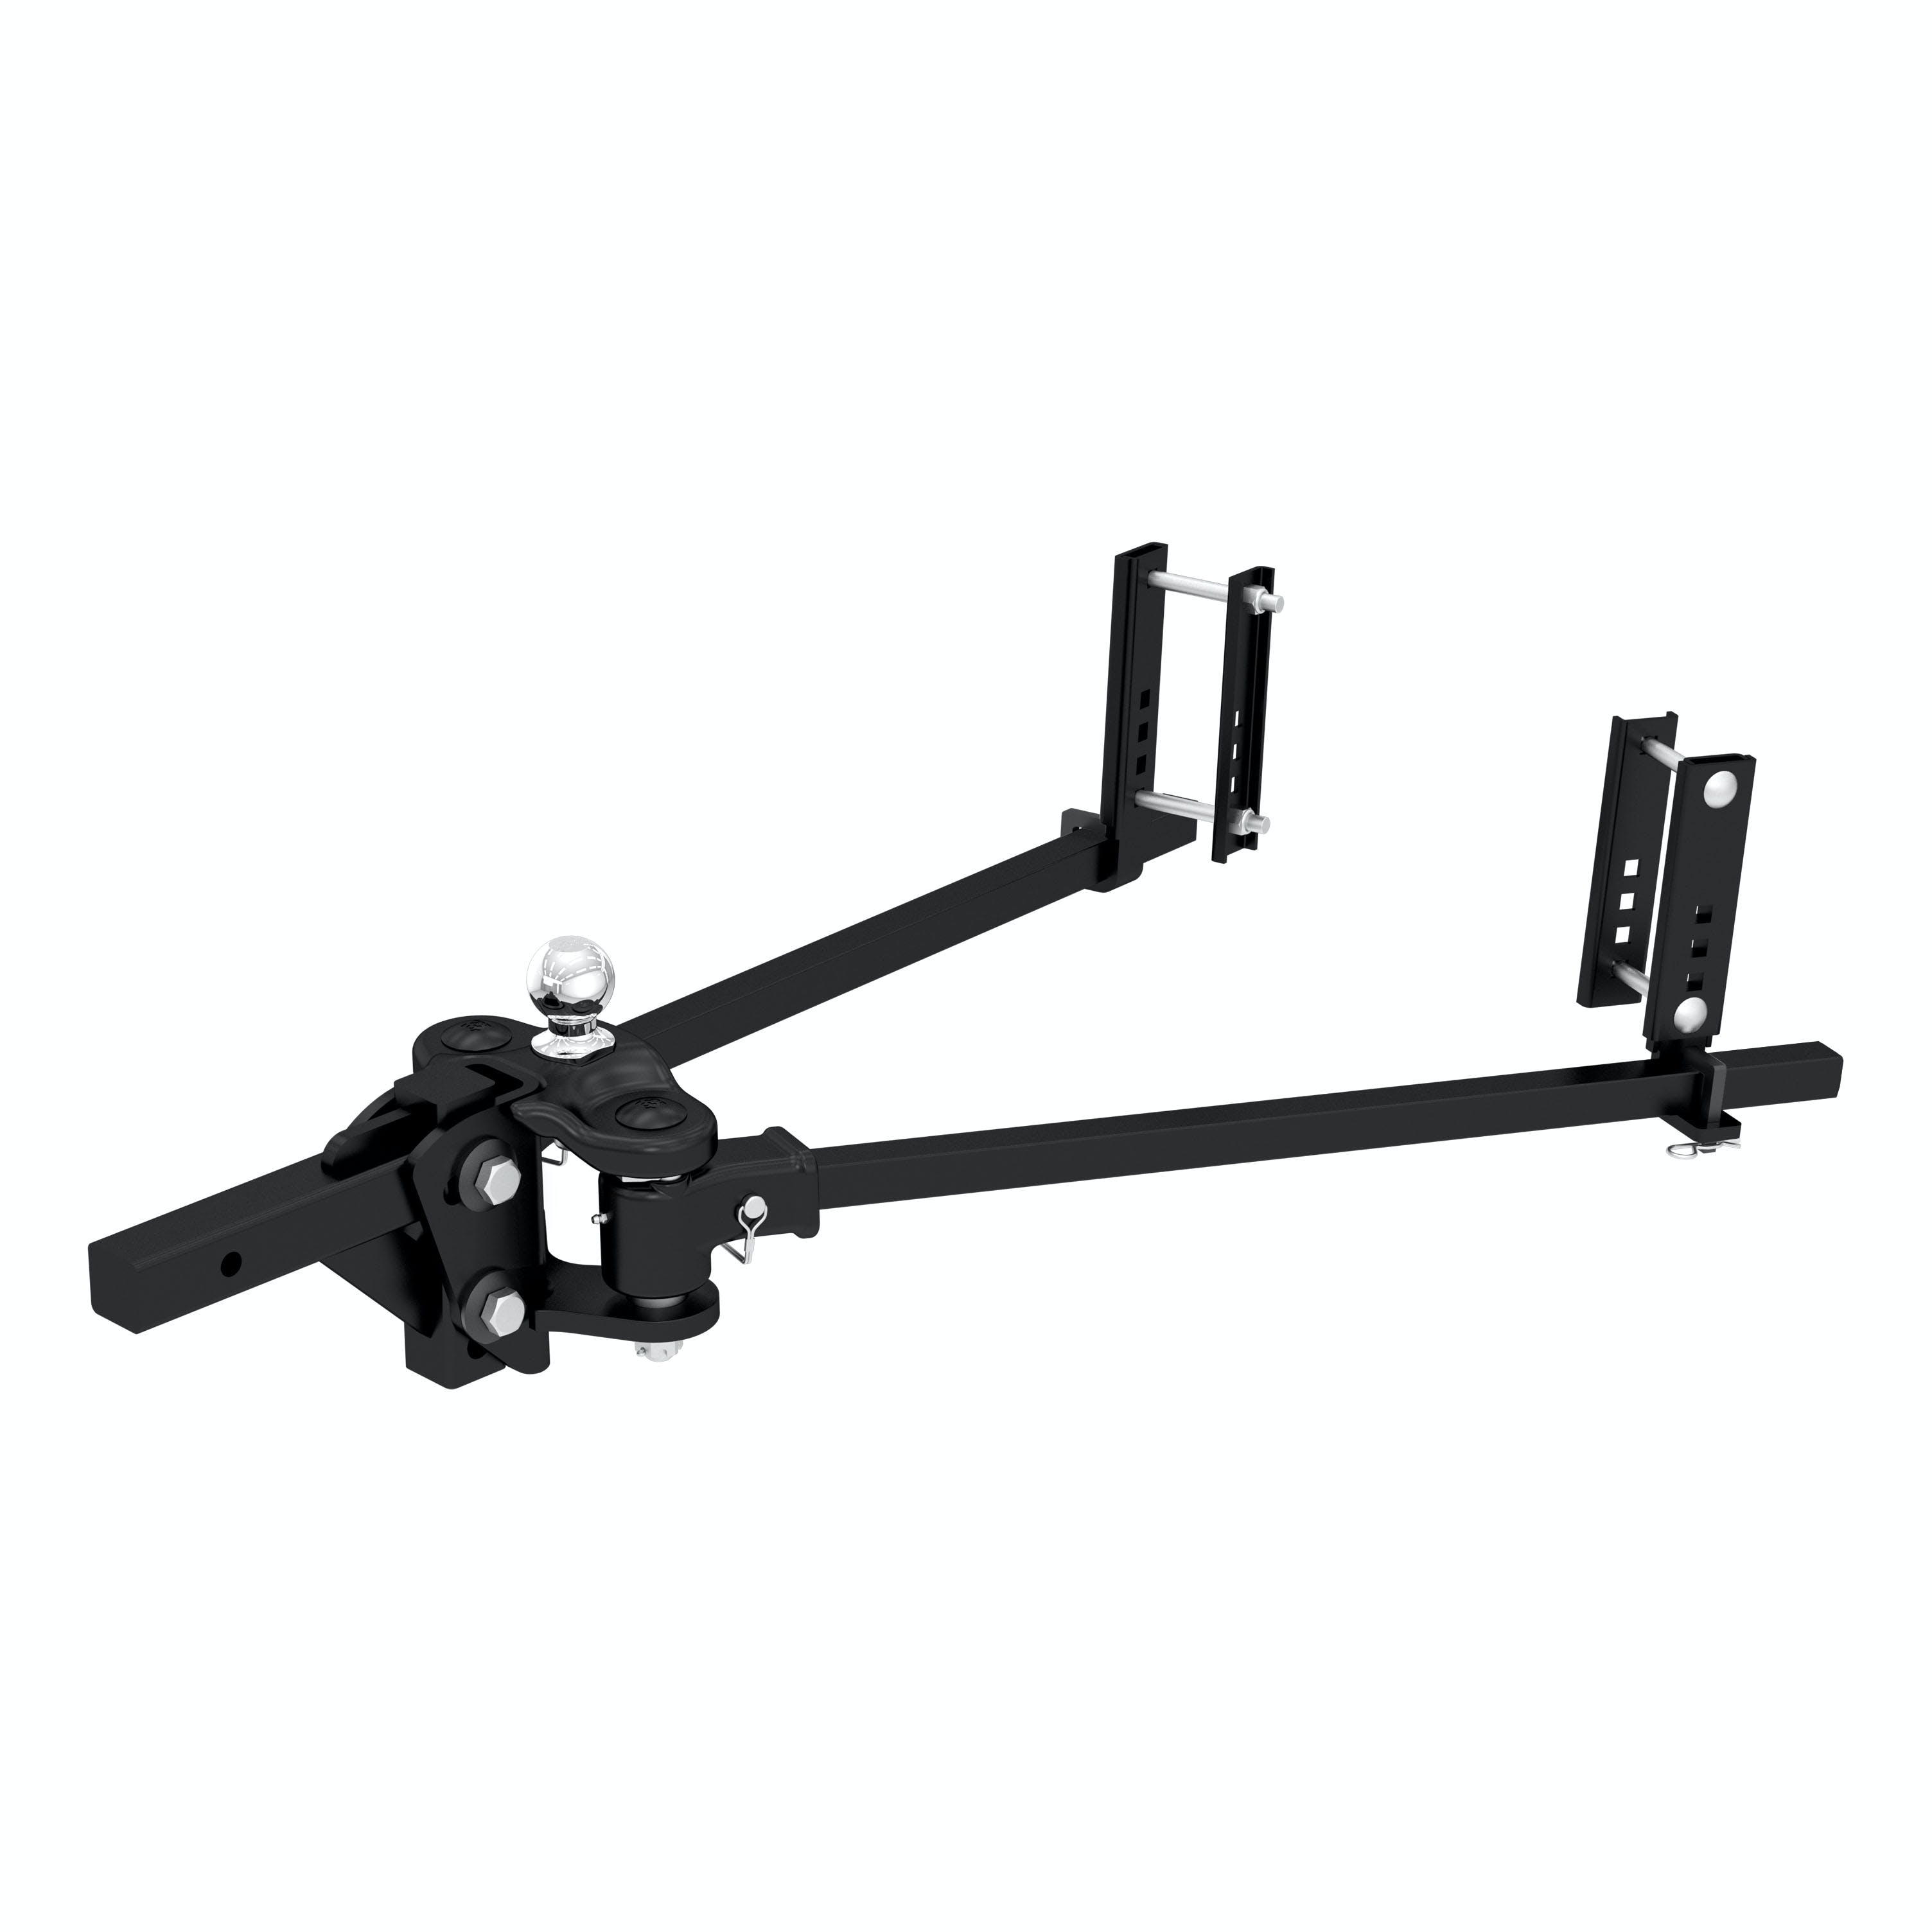 CURT 17501 TruTrack Weight Distribution Hitch with Sway Control (10-15K, 35-9/16 Bars)